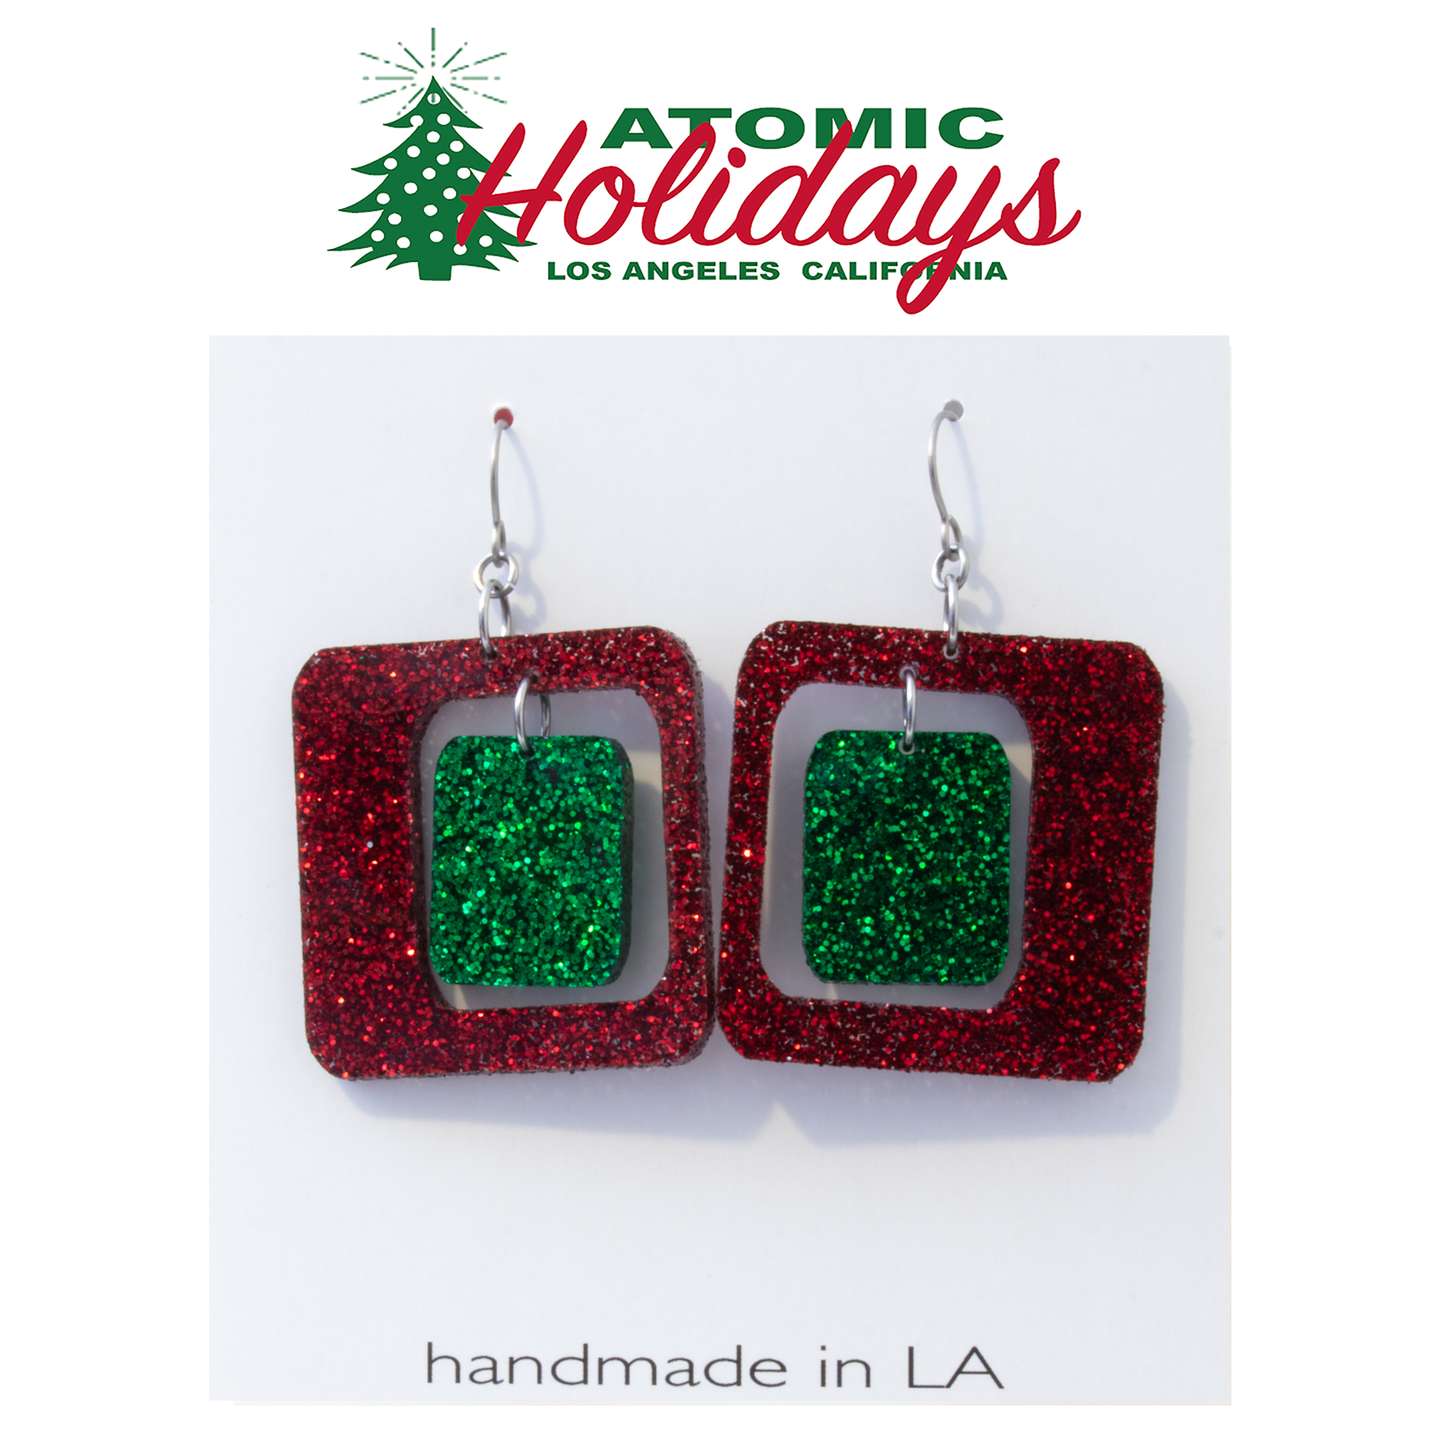 Atomic Holidays Statement Christmas Earrings in Glitter Red and Green - mid century modern Coolsville style by AtomicMobiles.com